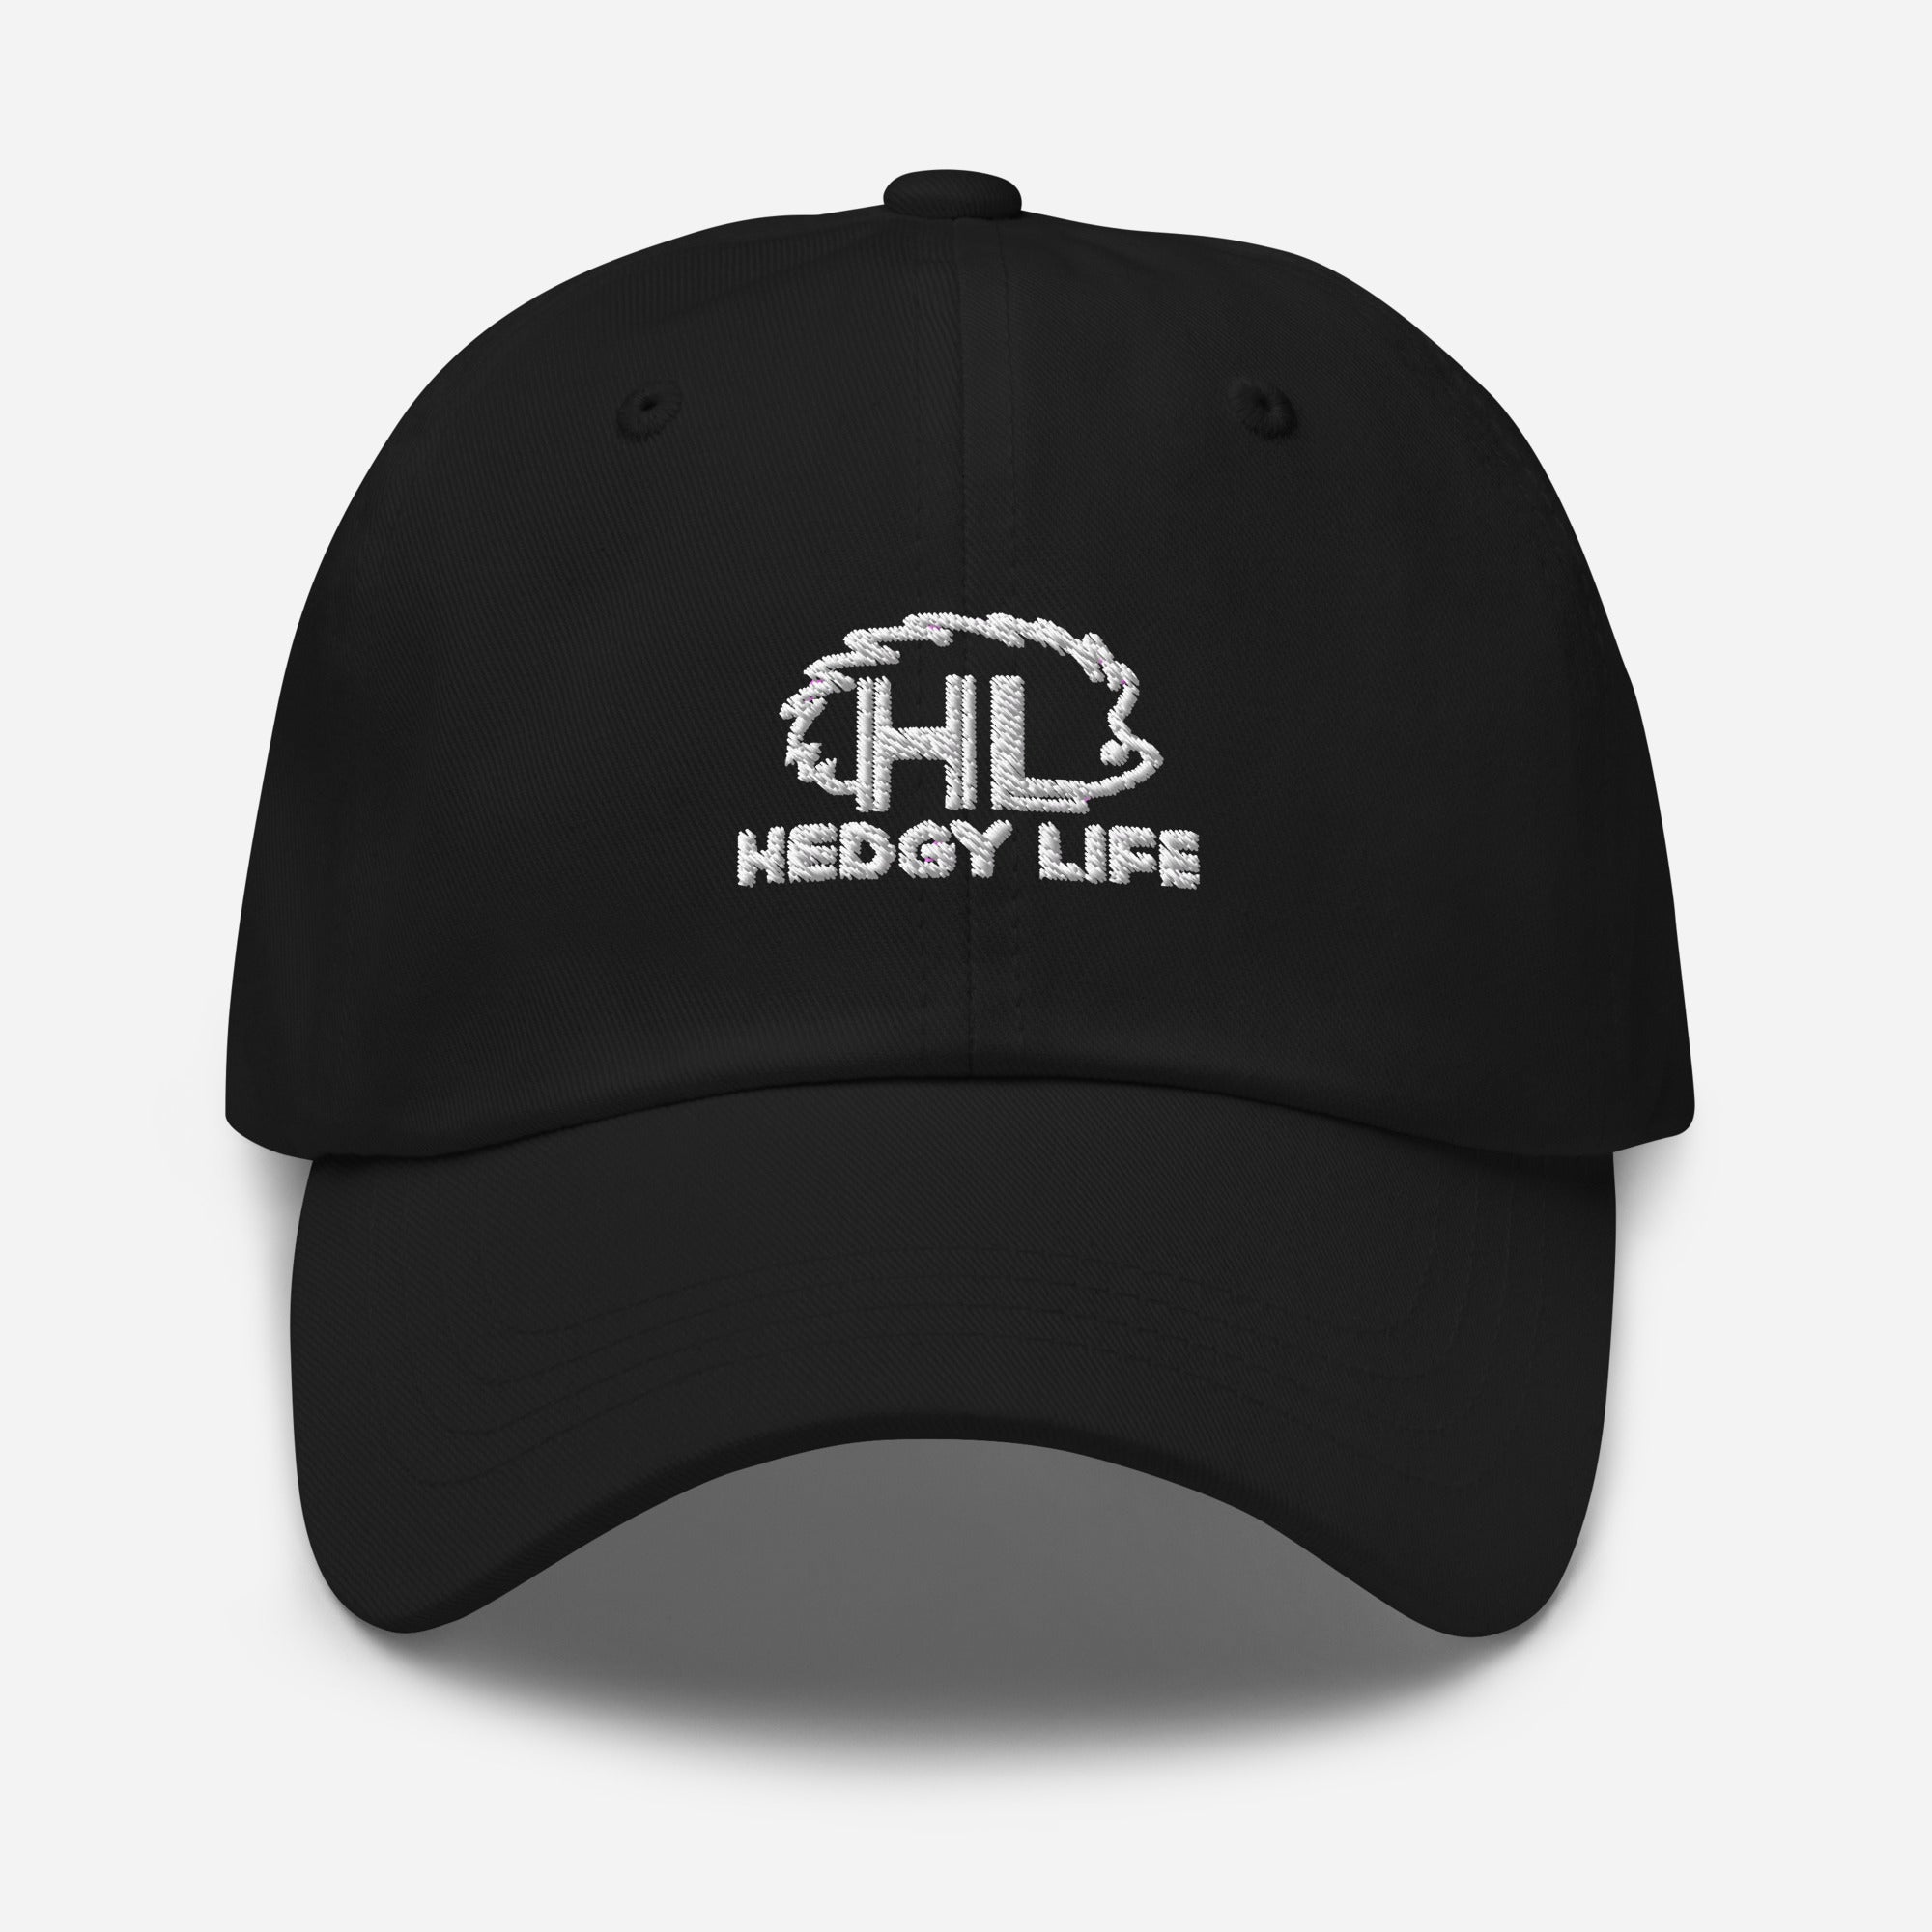 Hedgy Life Livin' Hat